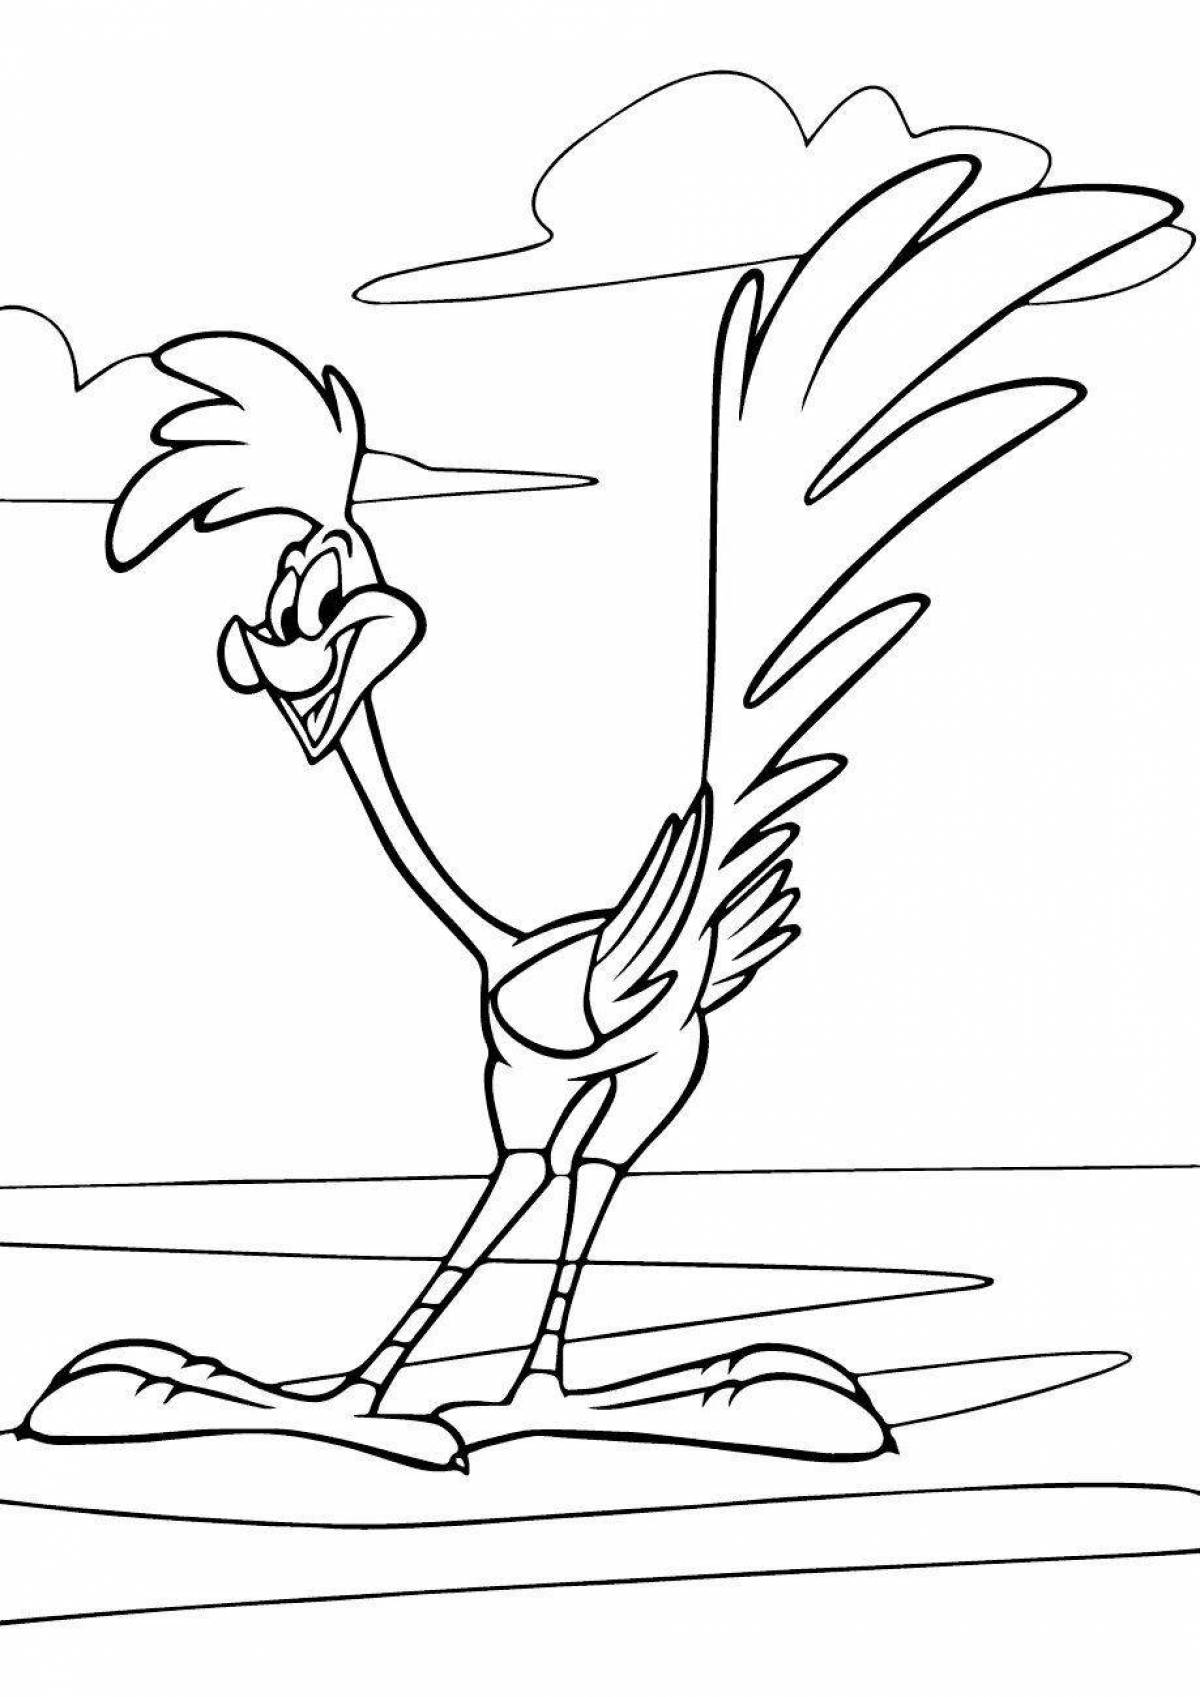 Color-vibrant road runner coloring page